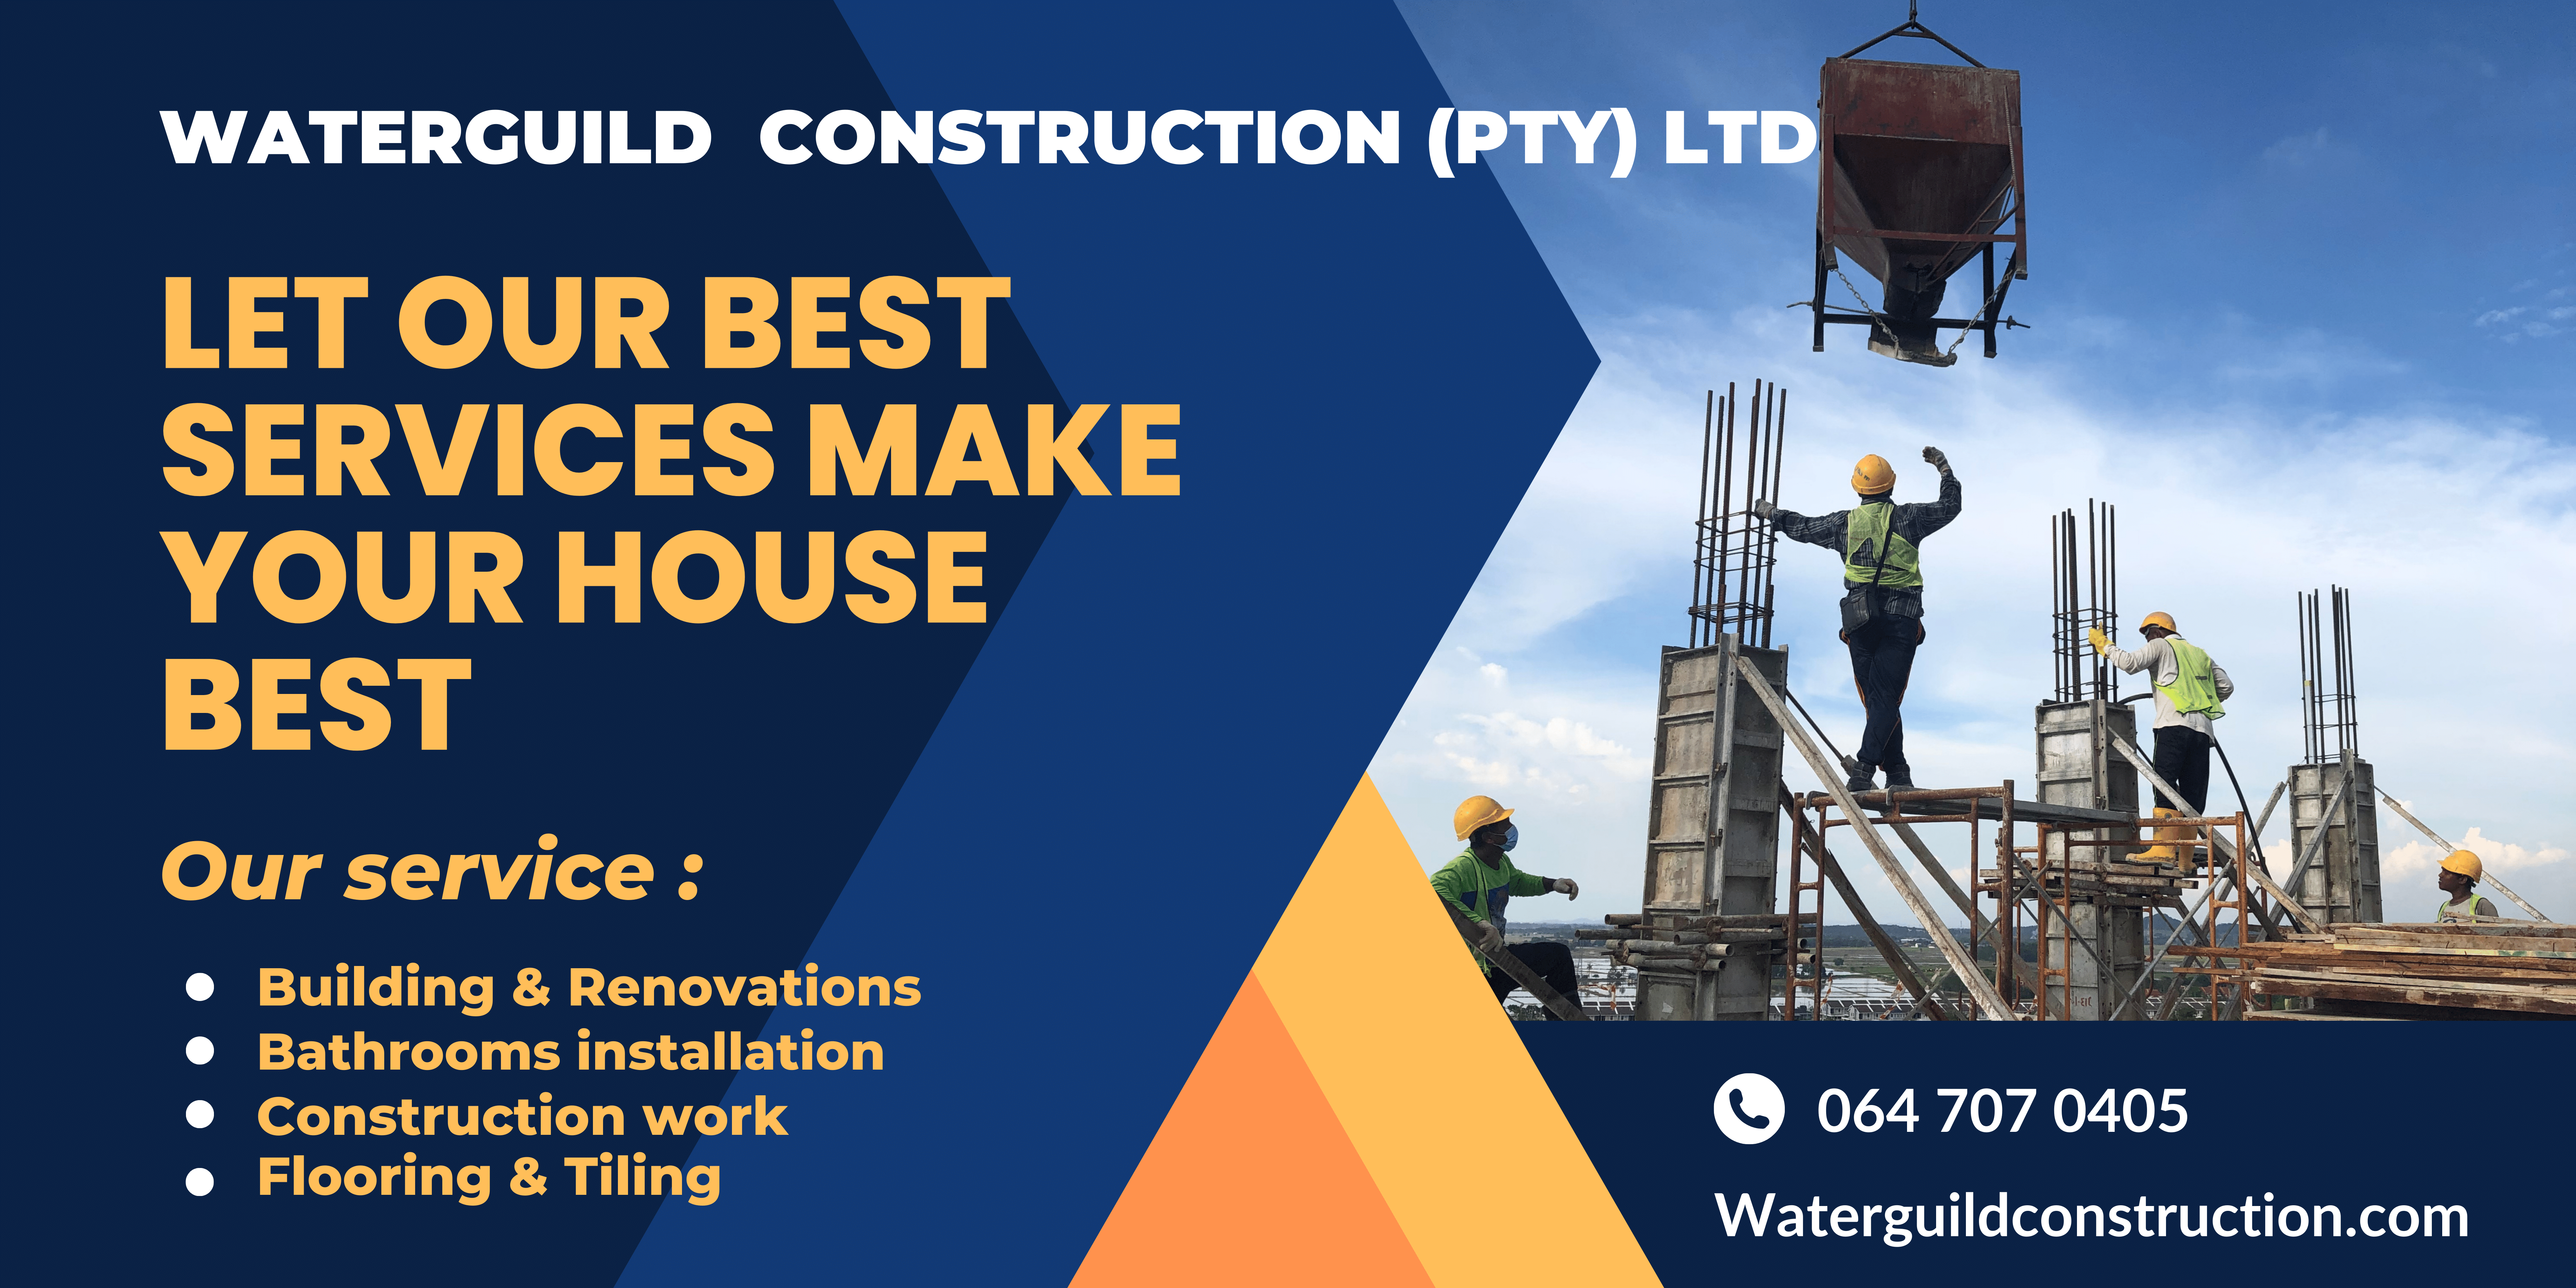 SE: ie gs |
k ey BH
5 of be

LET OUR BEST
SERVICES MAKE
YOUR HOUSE

BEST

Our service:

Building &amp; Renovations
Bathrooms installation
Construction work
SLY Id RET]

     
  

RYH

Woaterguildconstruction.com